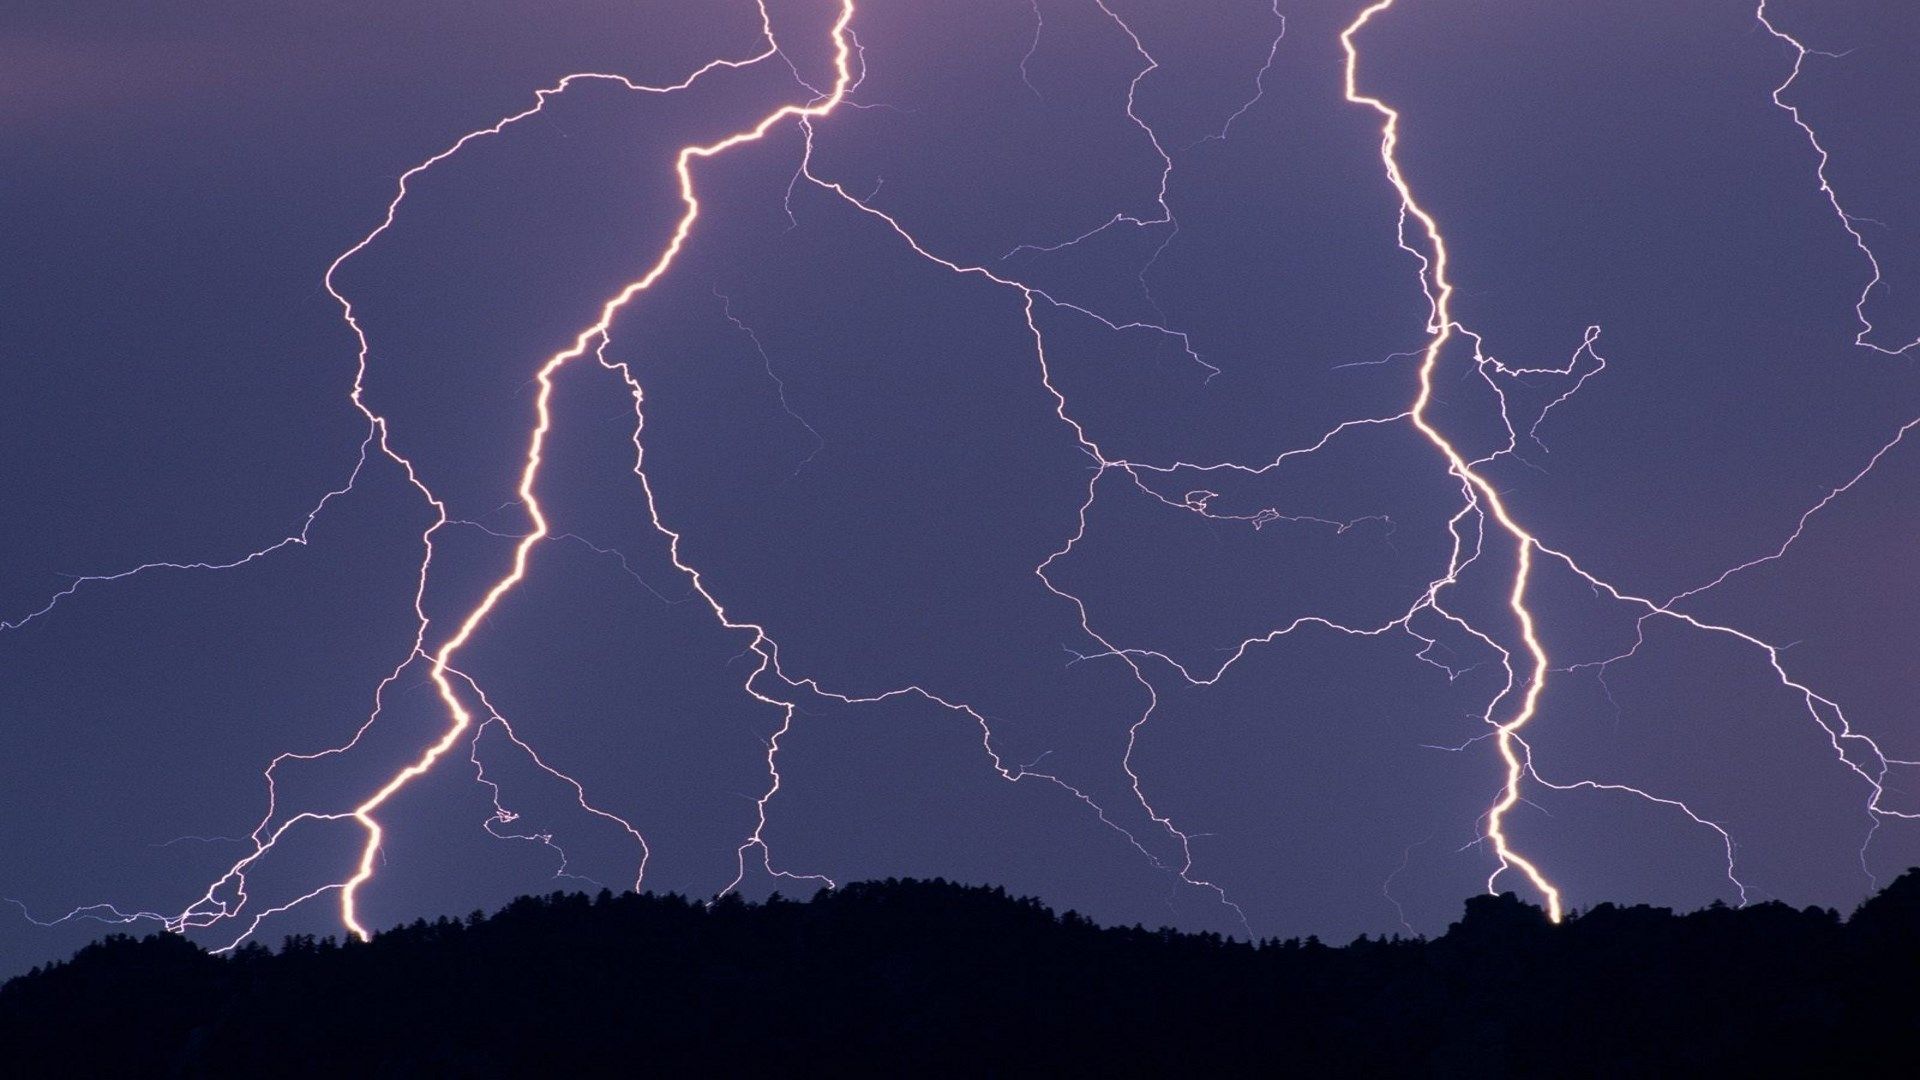 A photo of lightning bolts striking the ground in the distance - Lightning